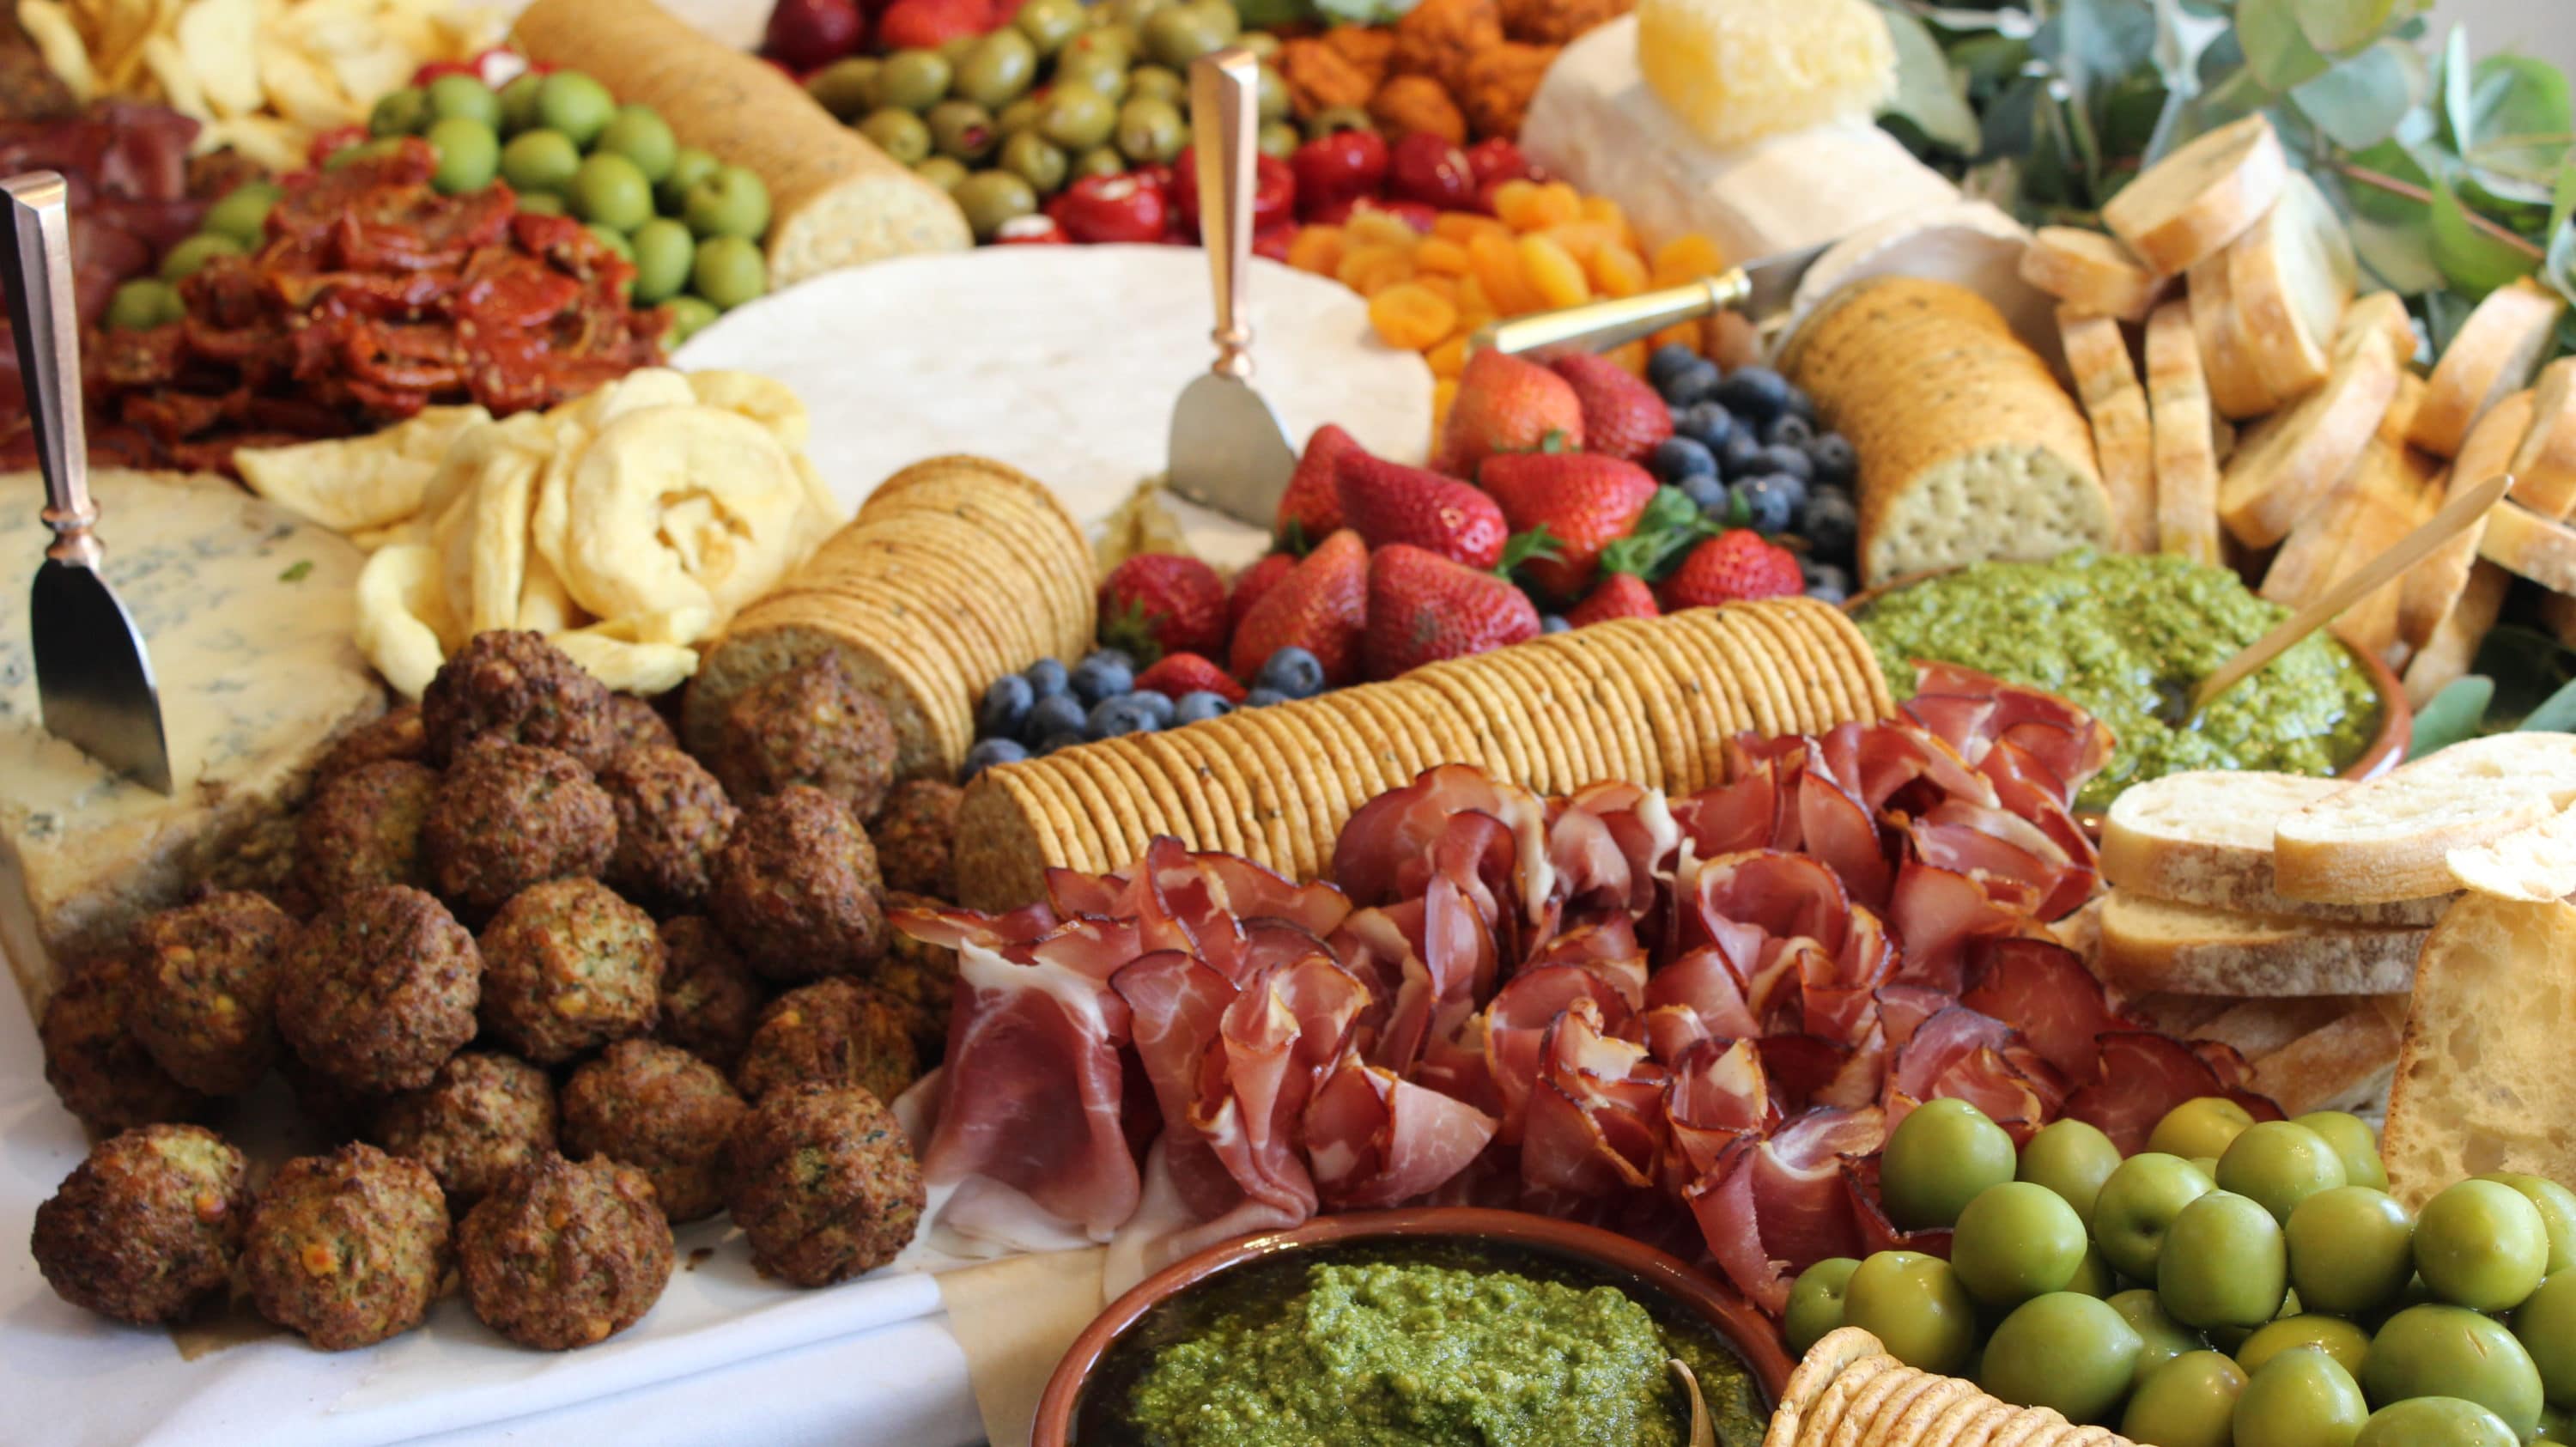 Grazing table of fruits, cold meats, dips and cheeses.